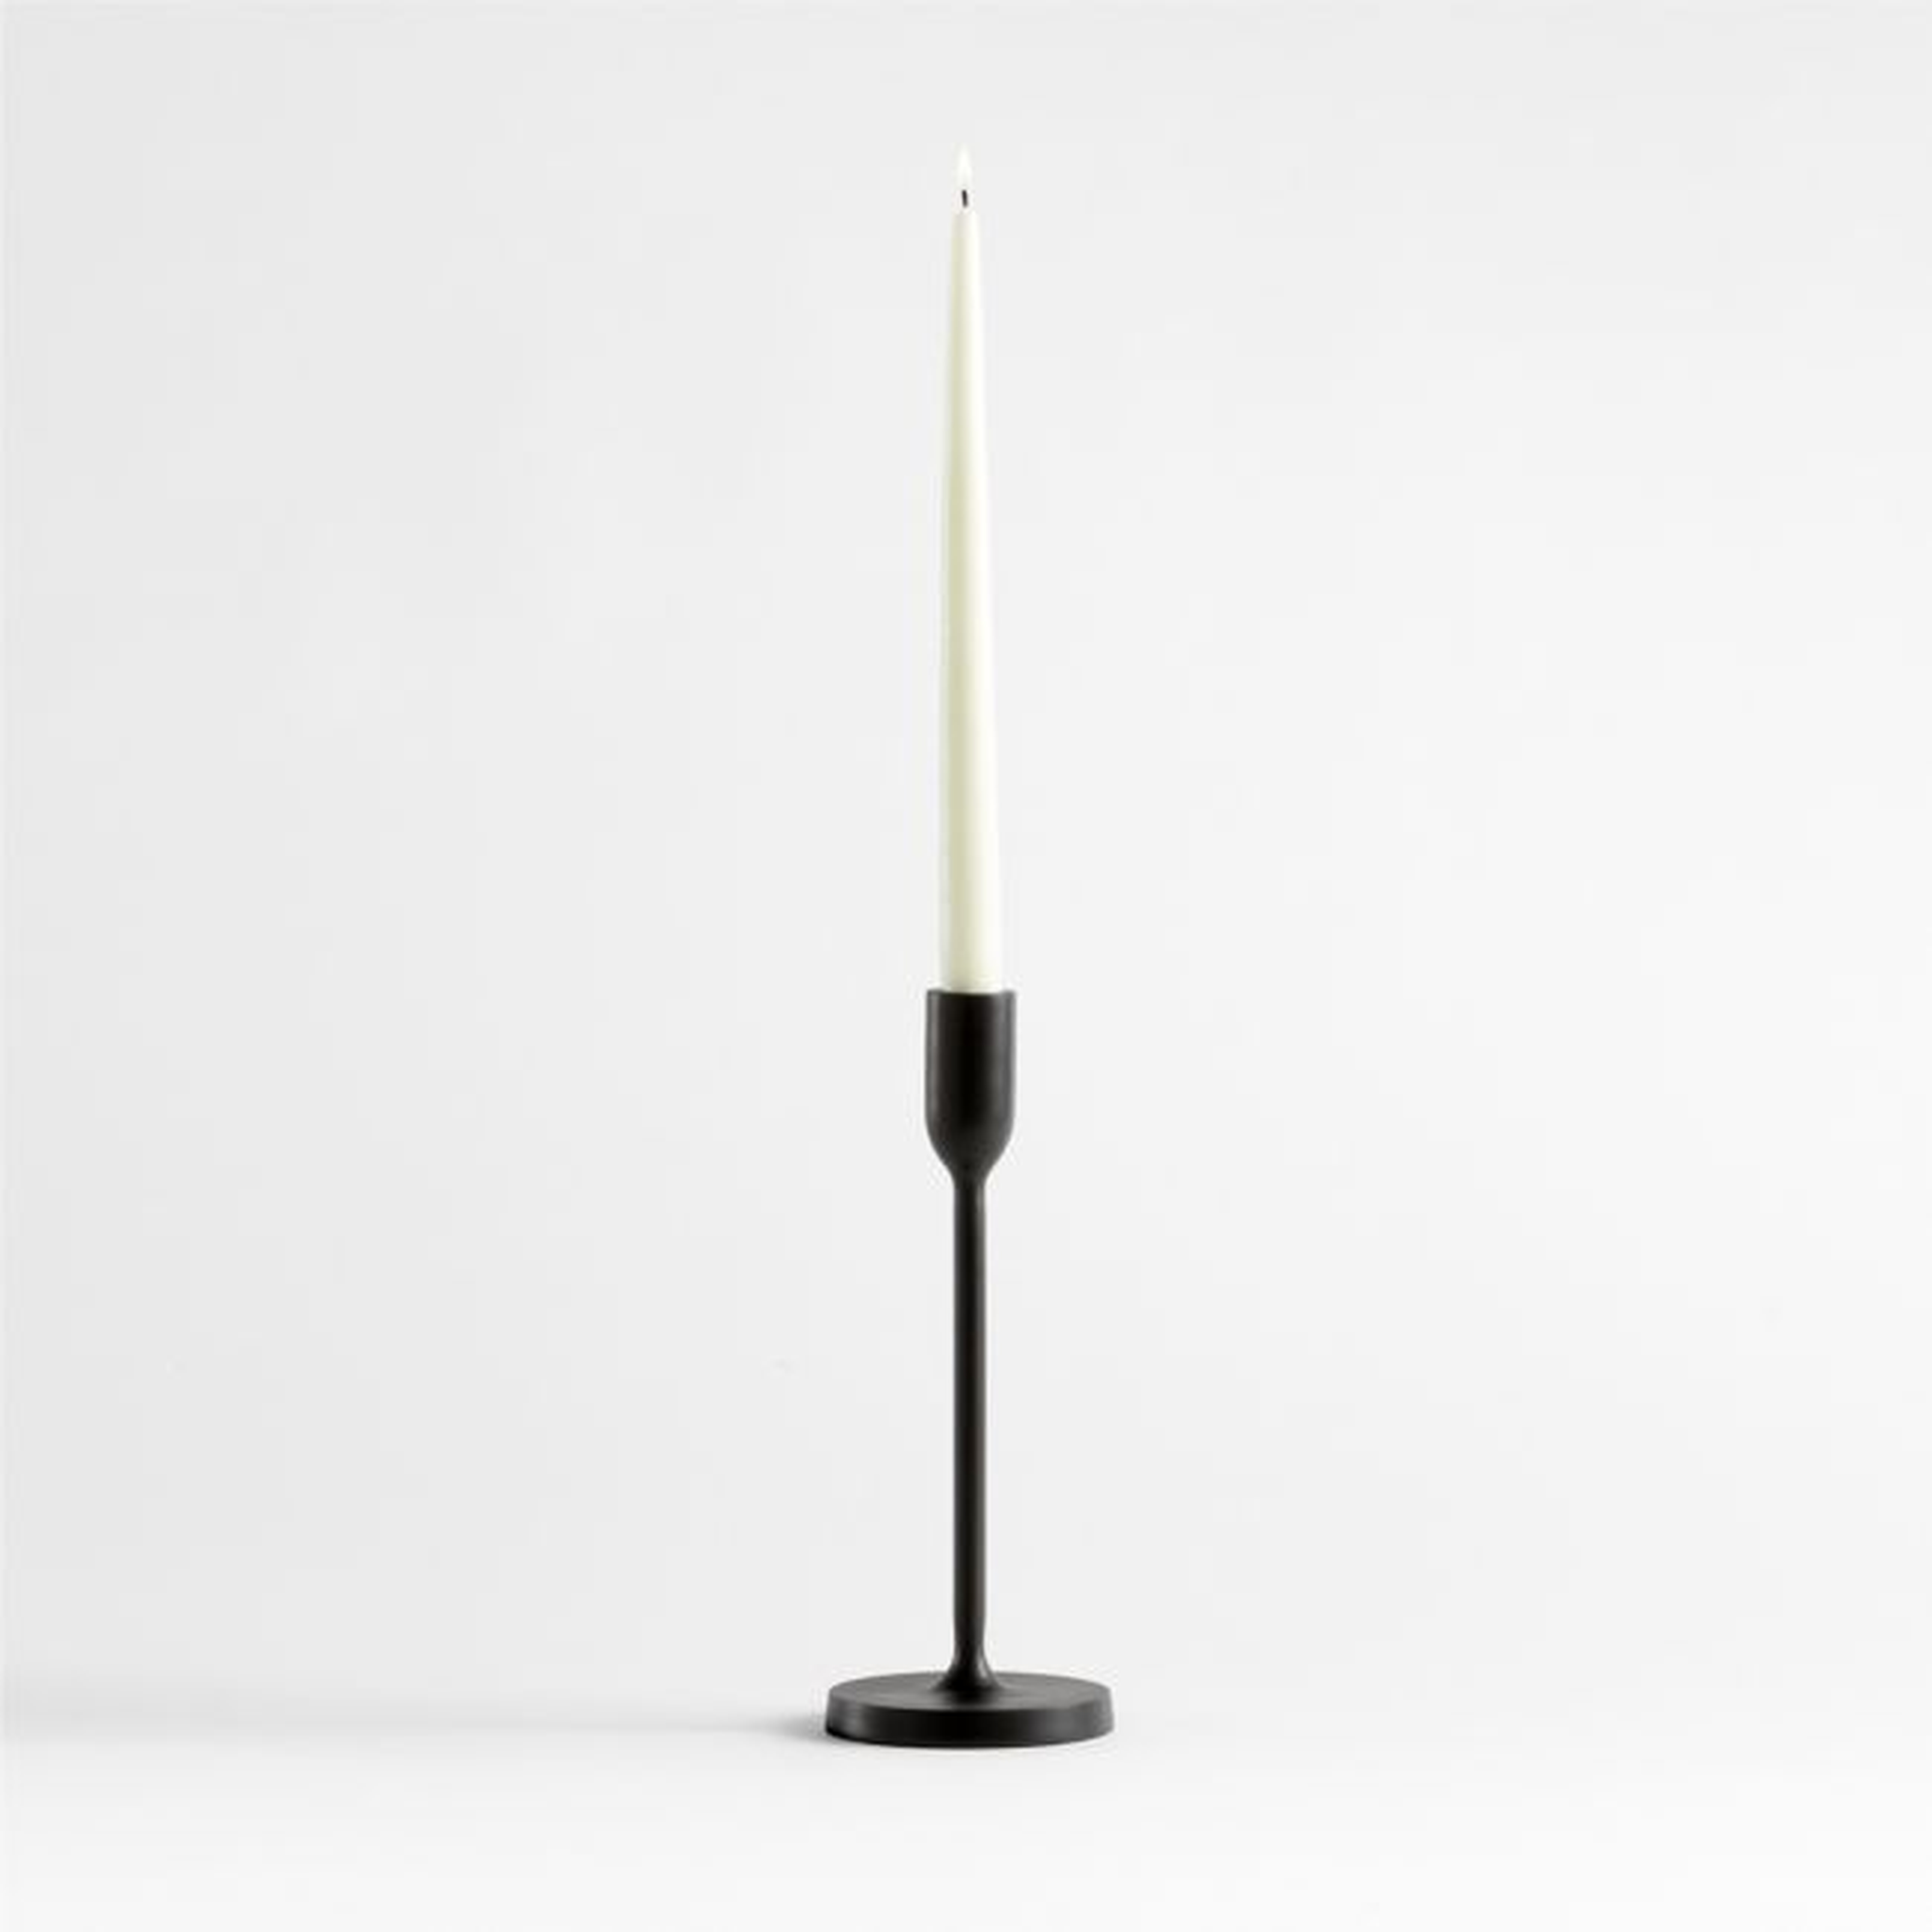 Megs Medium Black Taper Candle Holder 11" by Leanne Ford - Crate and Barrel